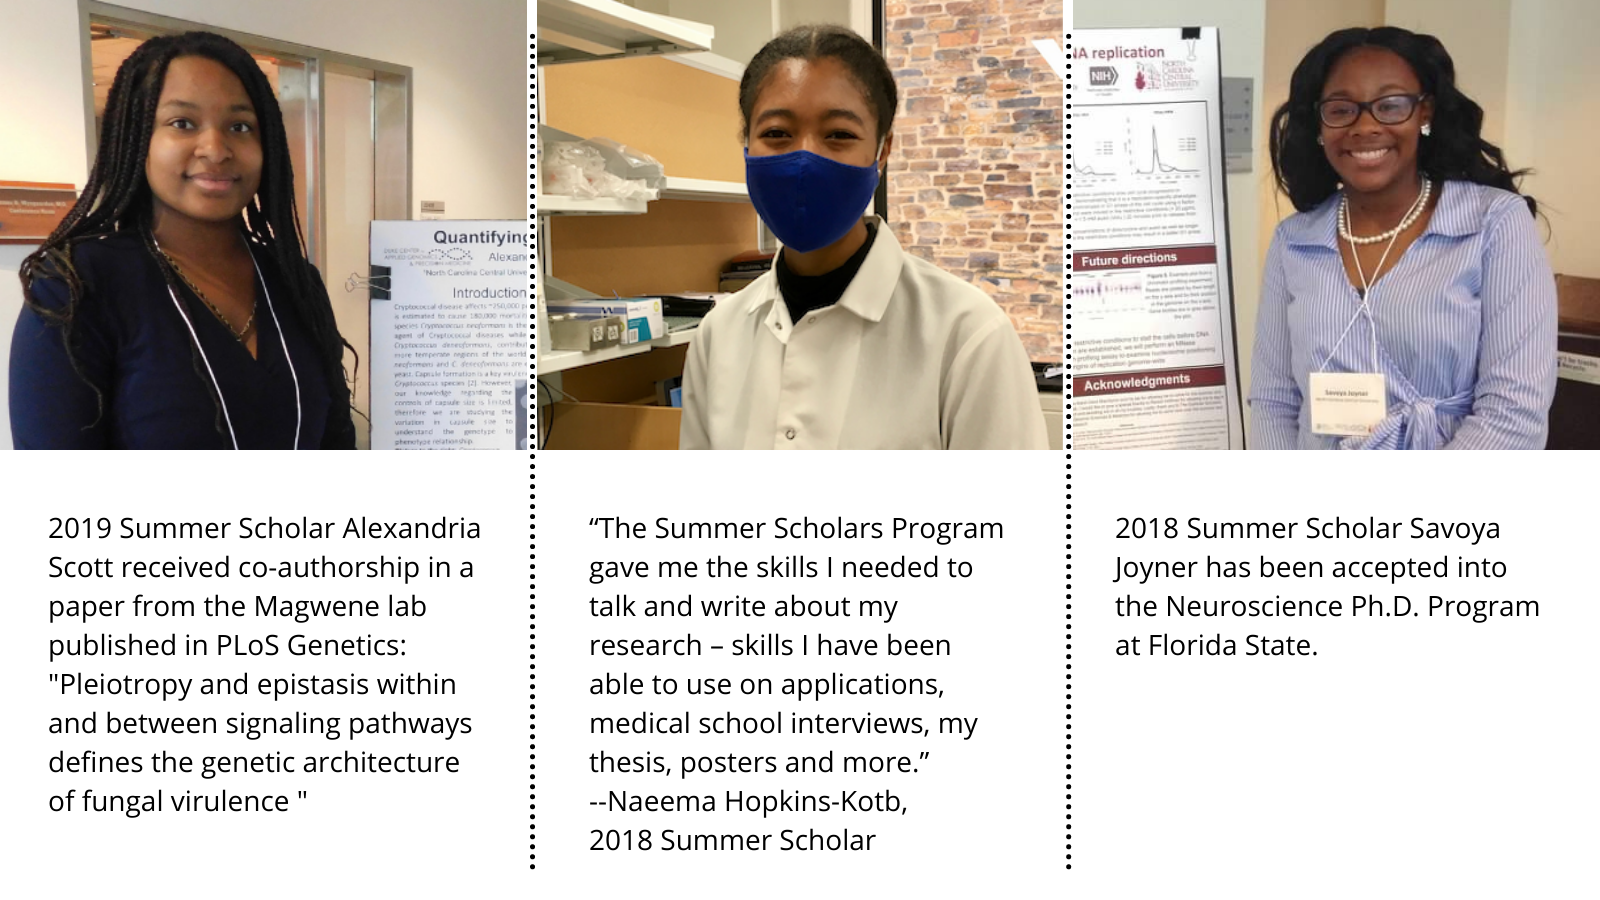 three summer scholars quote their top successes - text version available below